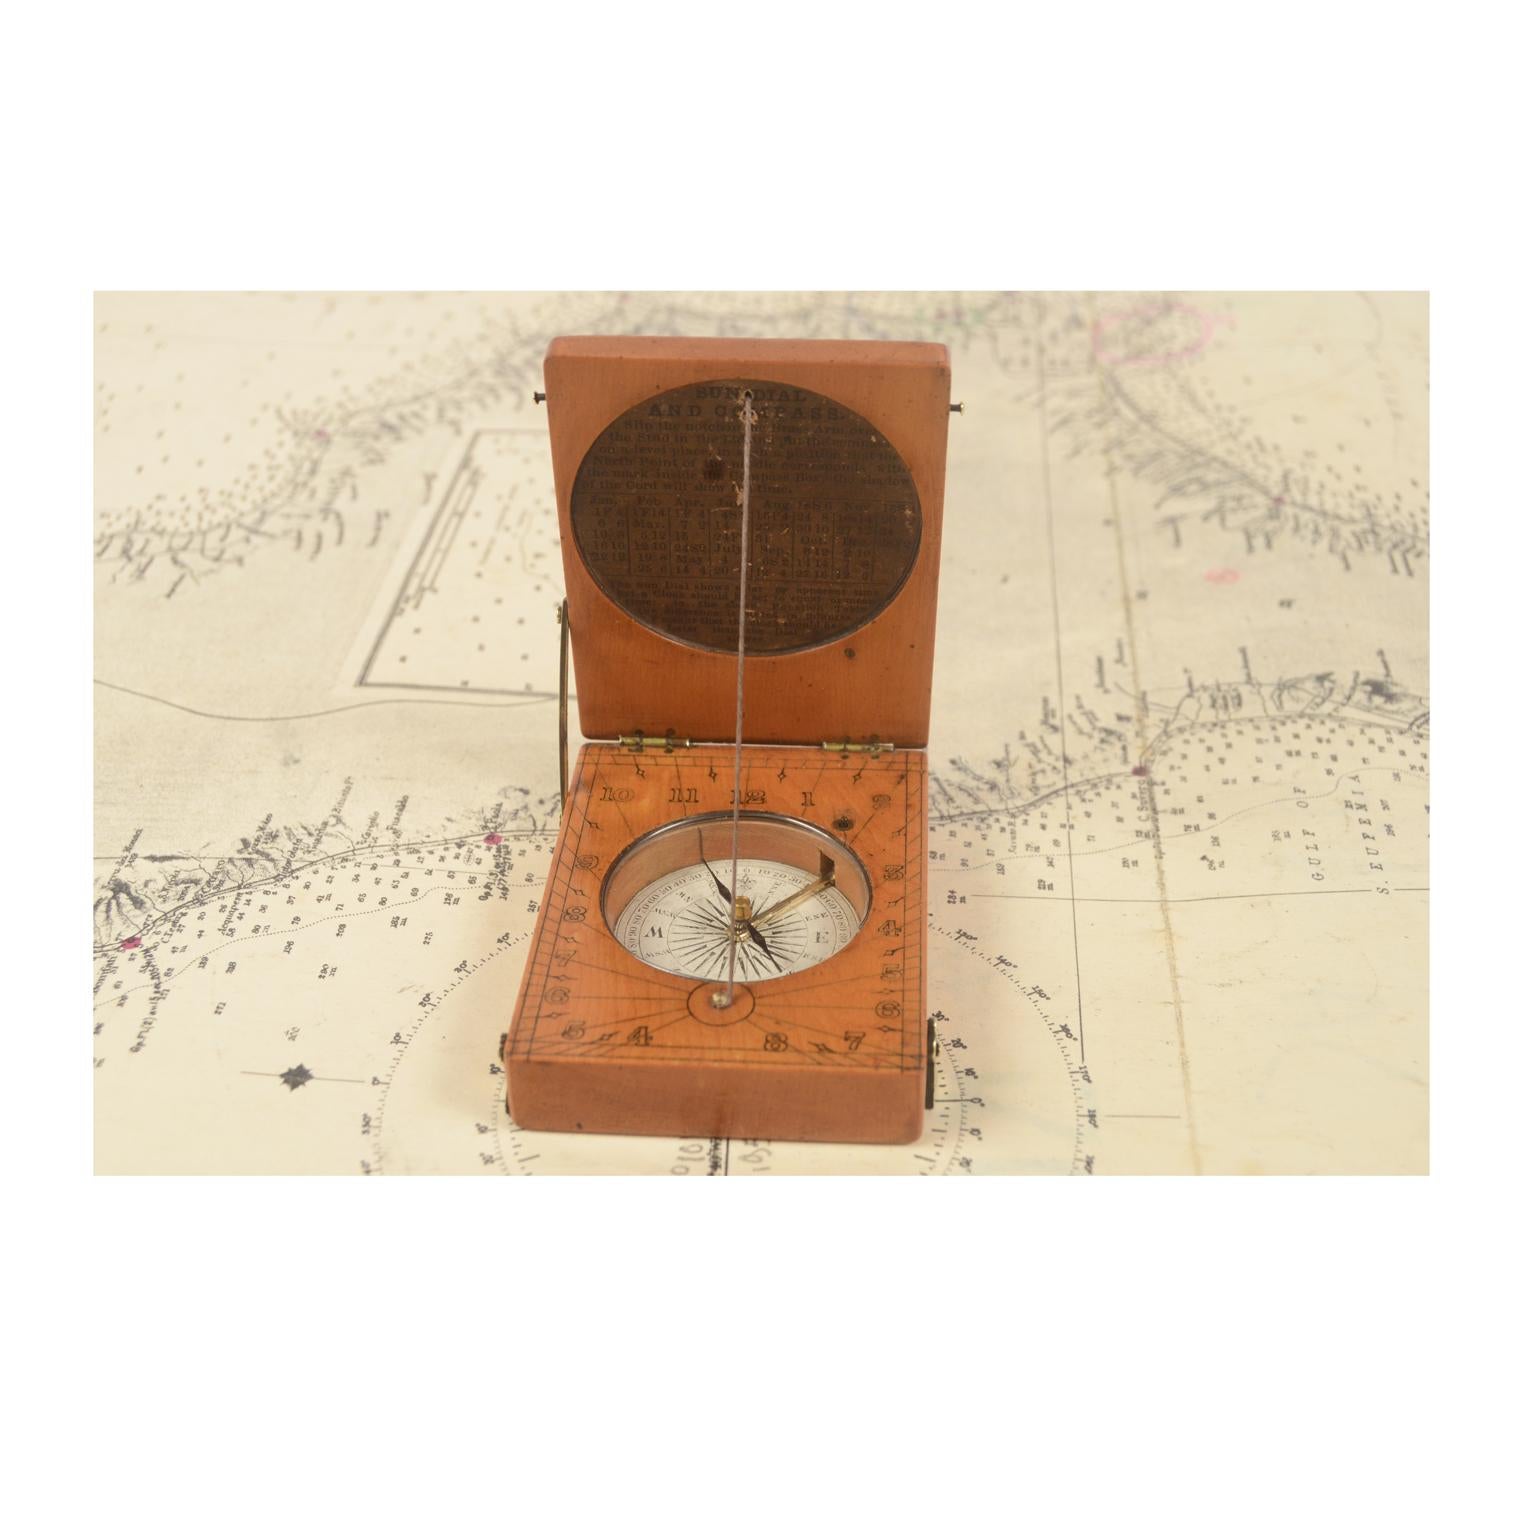 Engraved Boxwood Sundial English Manufacture of the 18th Century 3